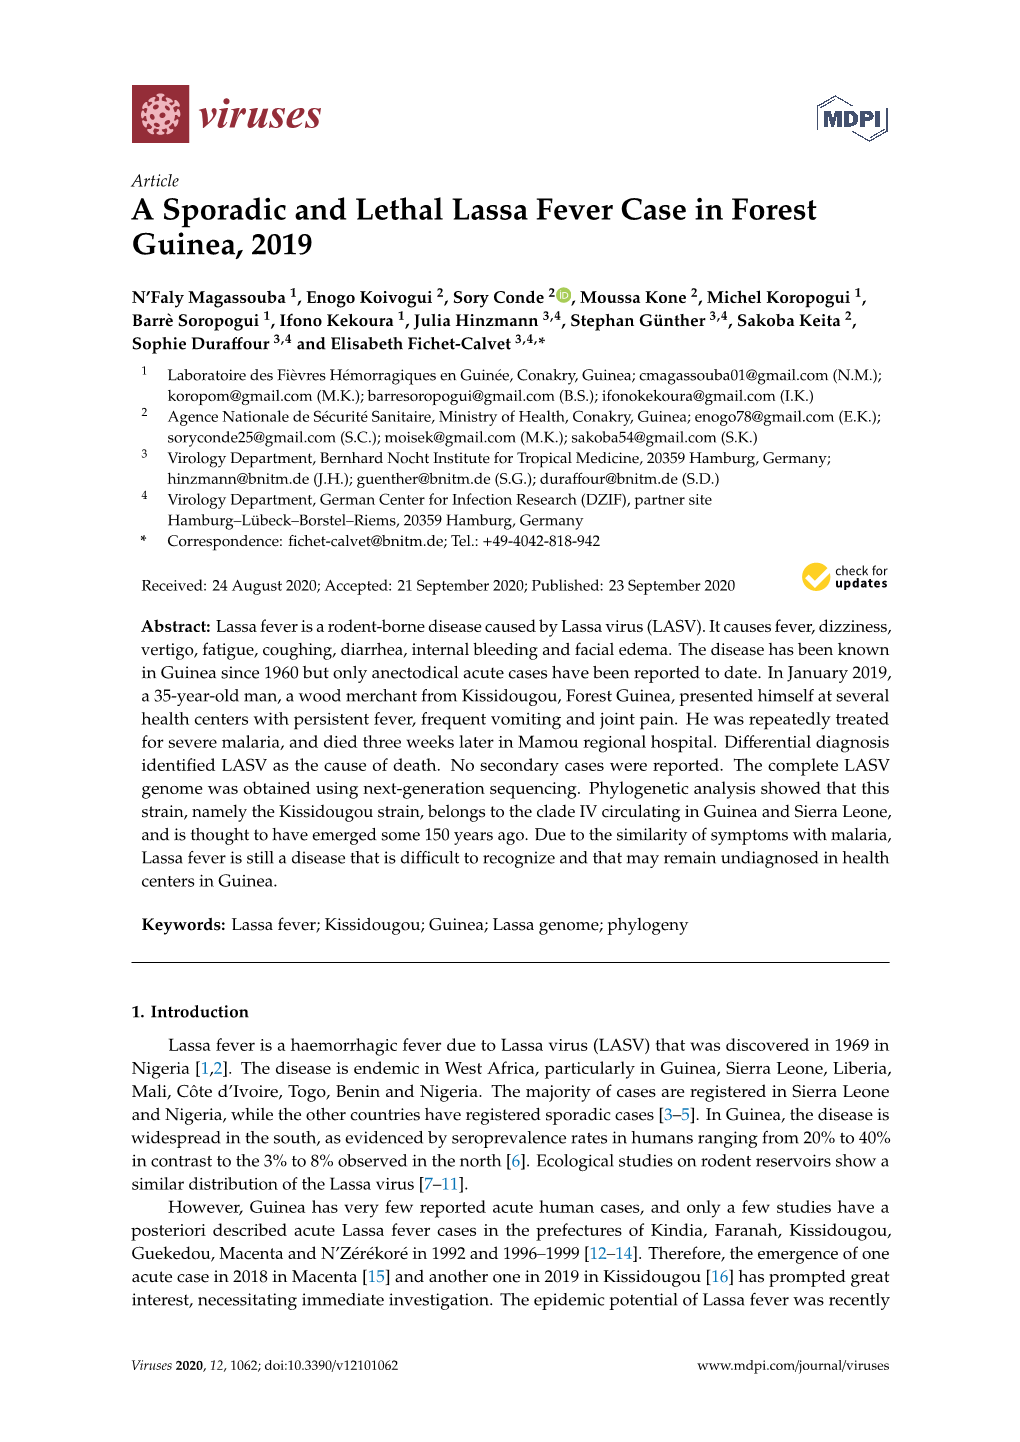 A Sporadic and Lethal Lassa Fever Case in Forest Guinea, 2019